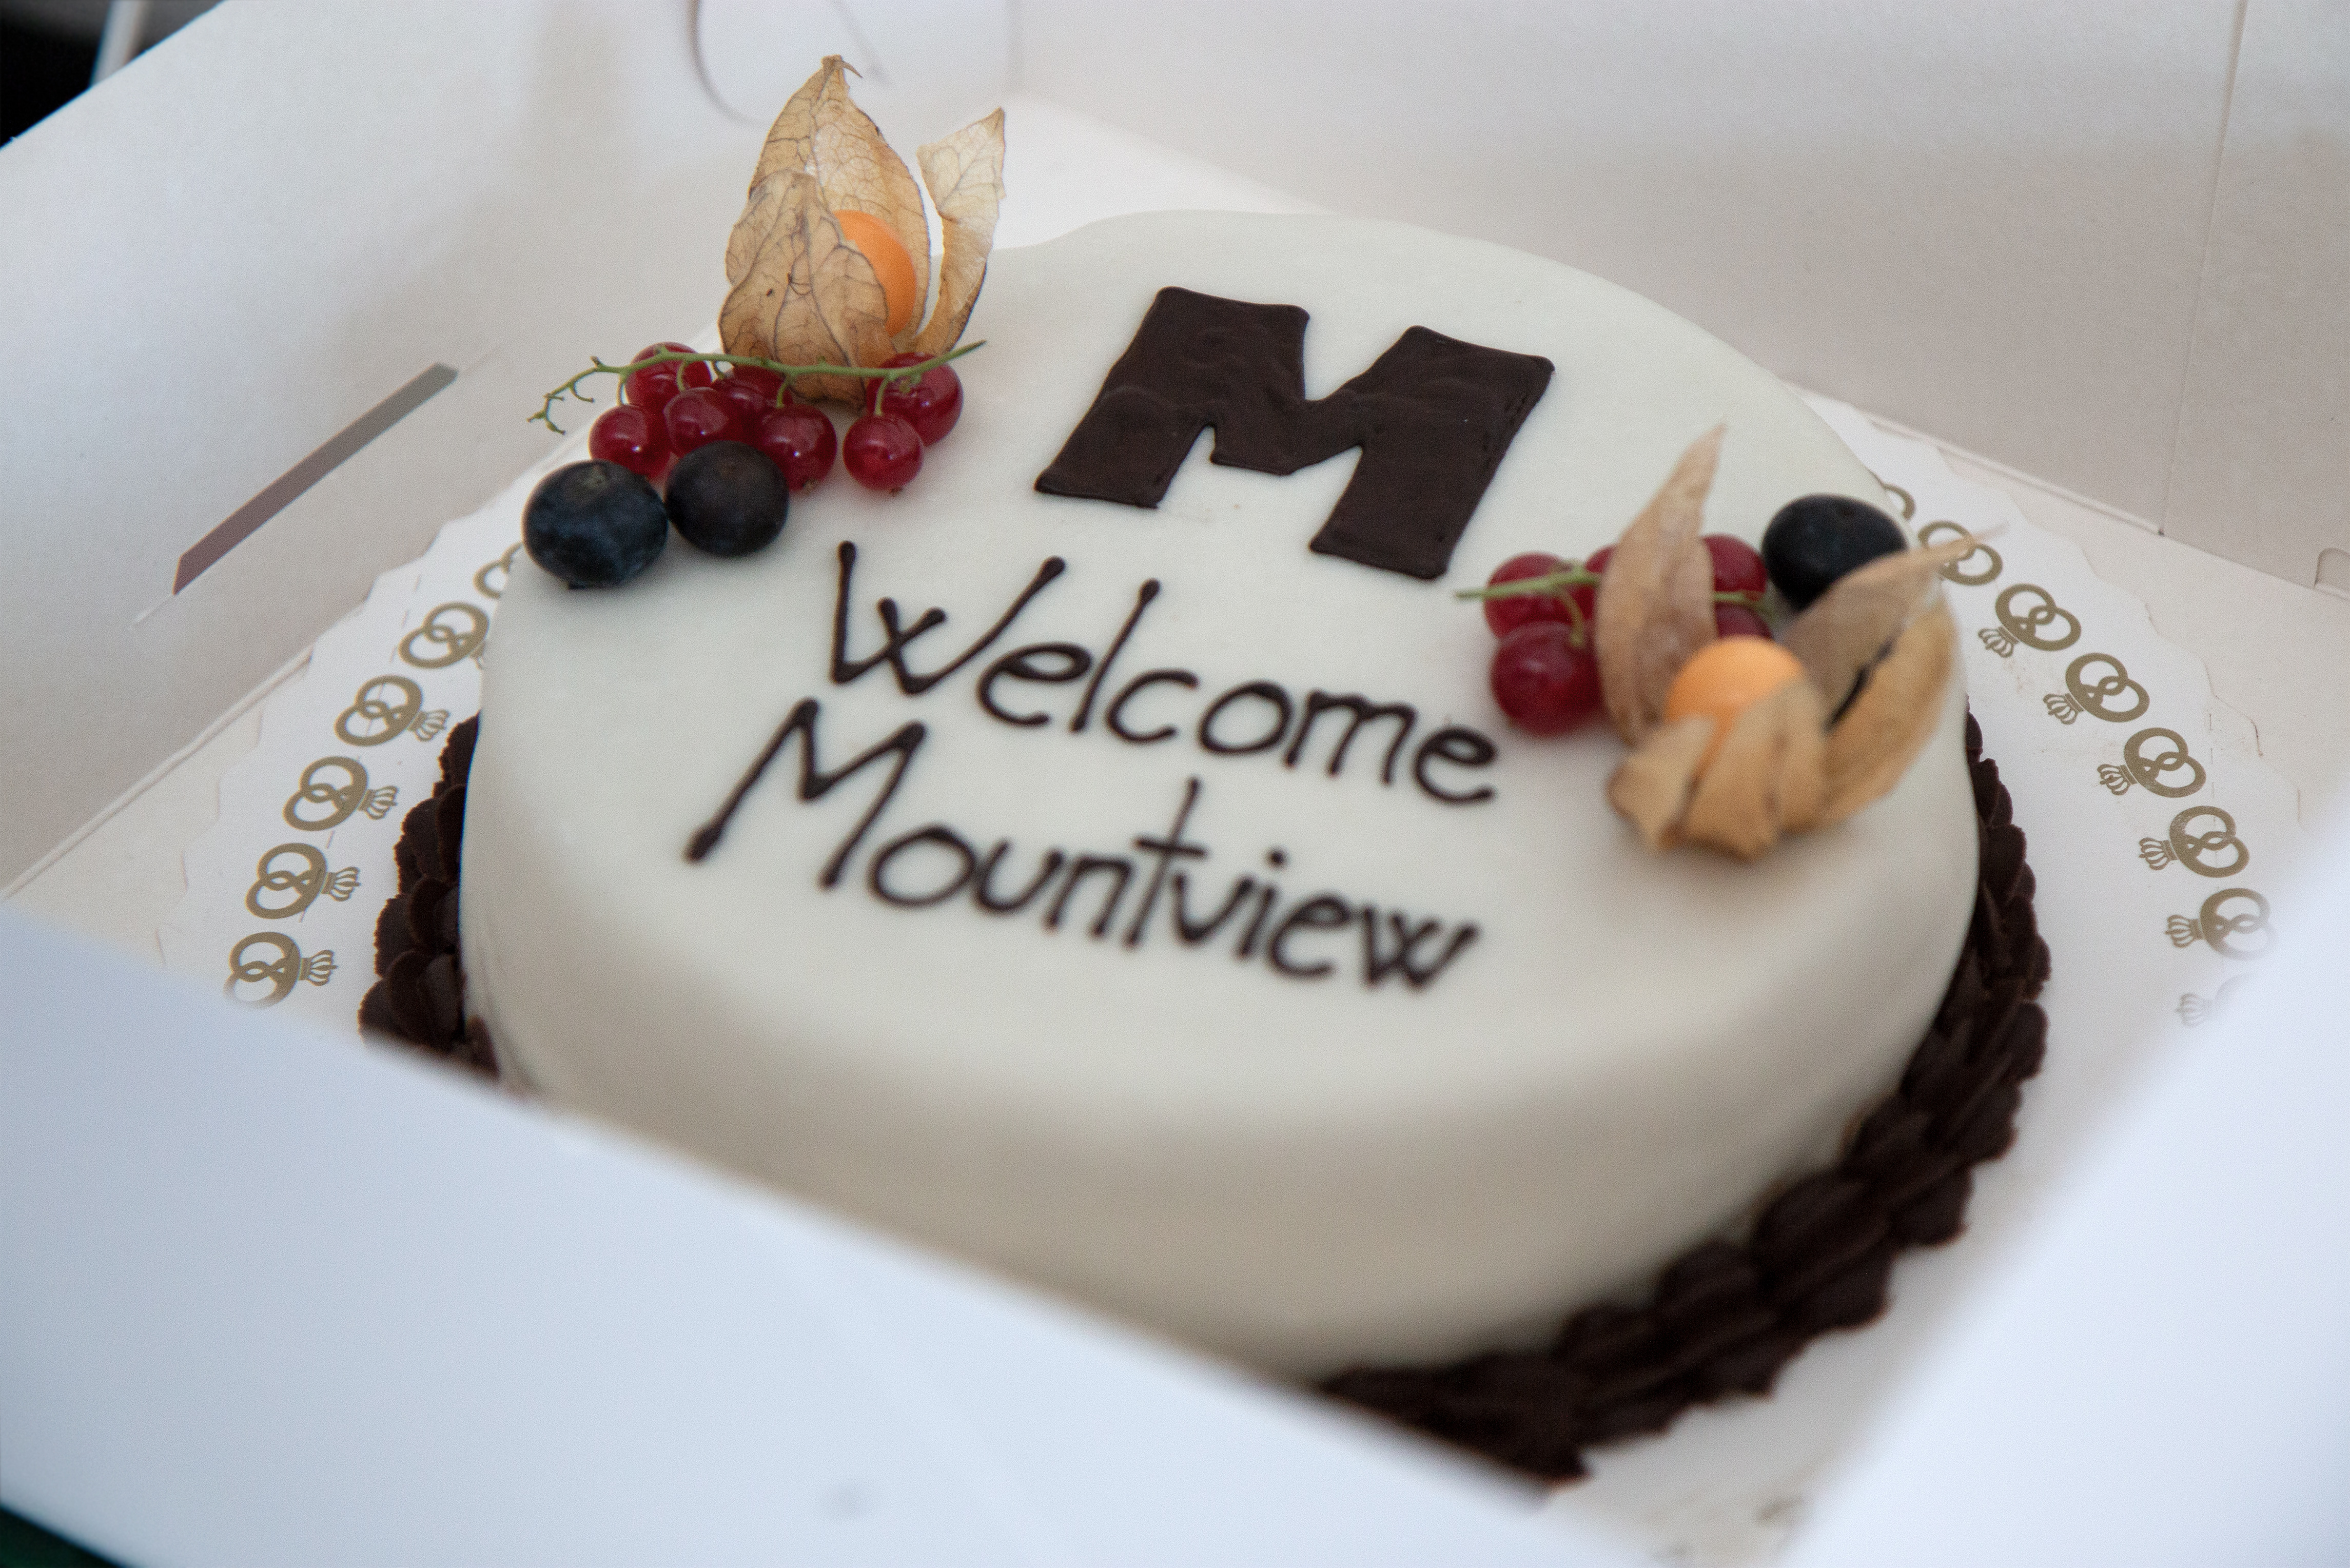 Welcome cake for Mountview